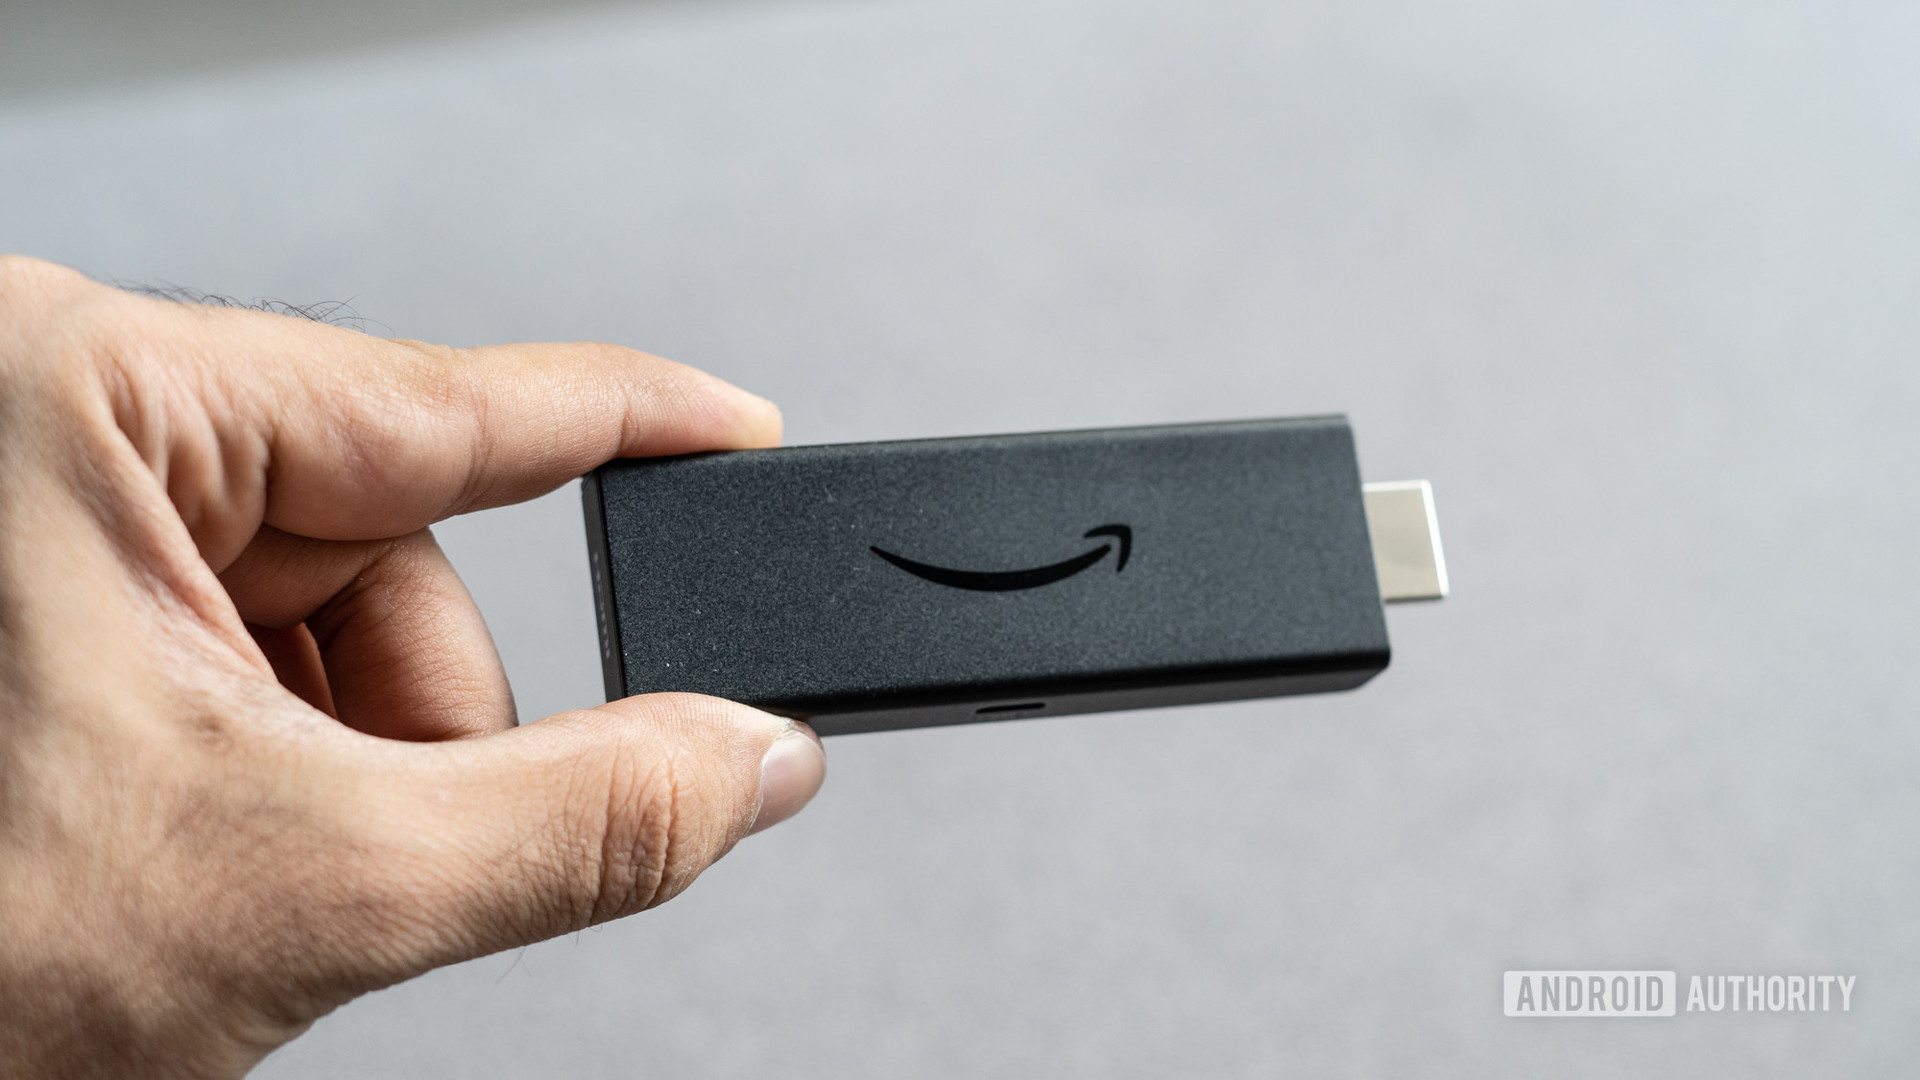 Fire TV Stick (2020) review: just get a 4K model - The Verge